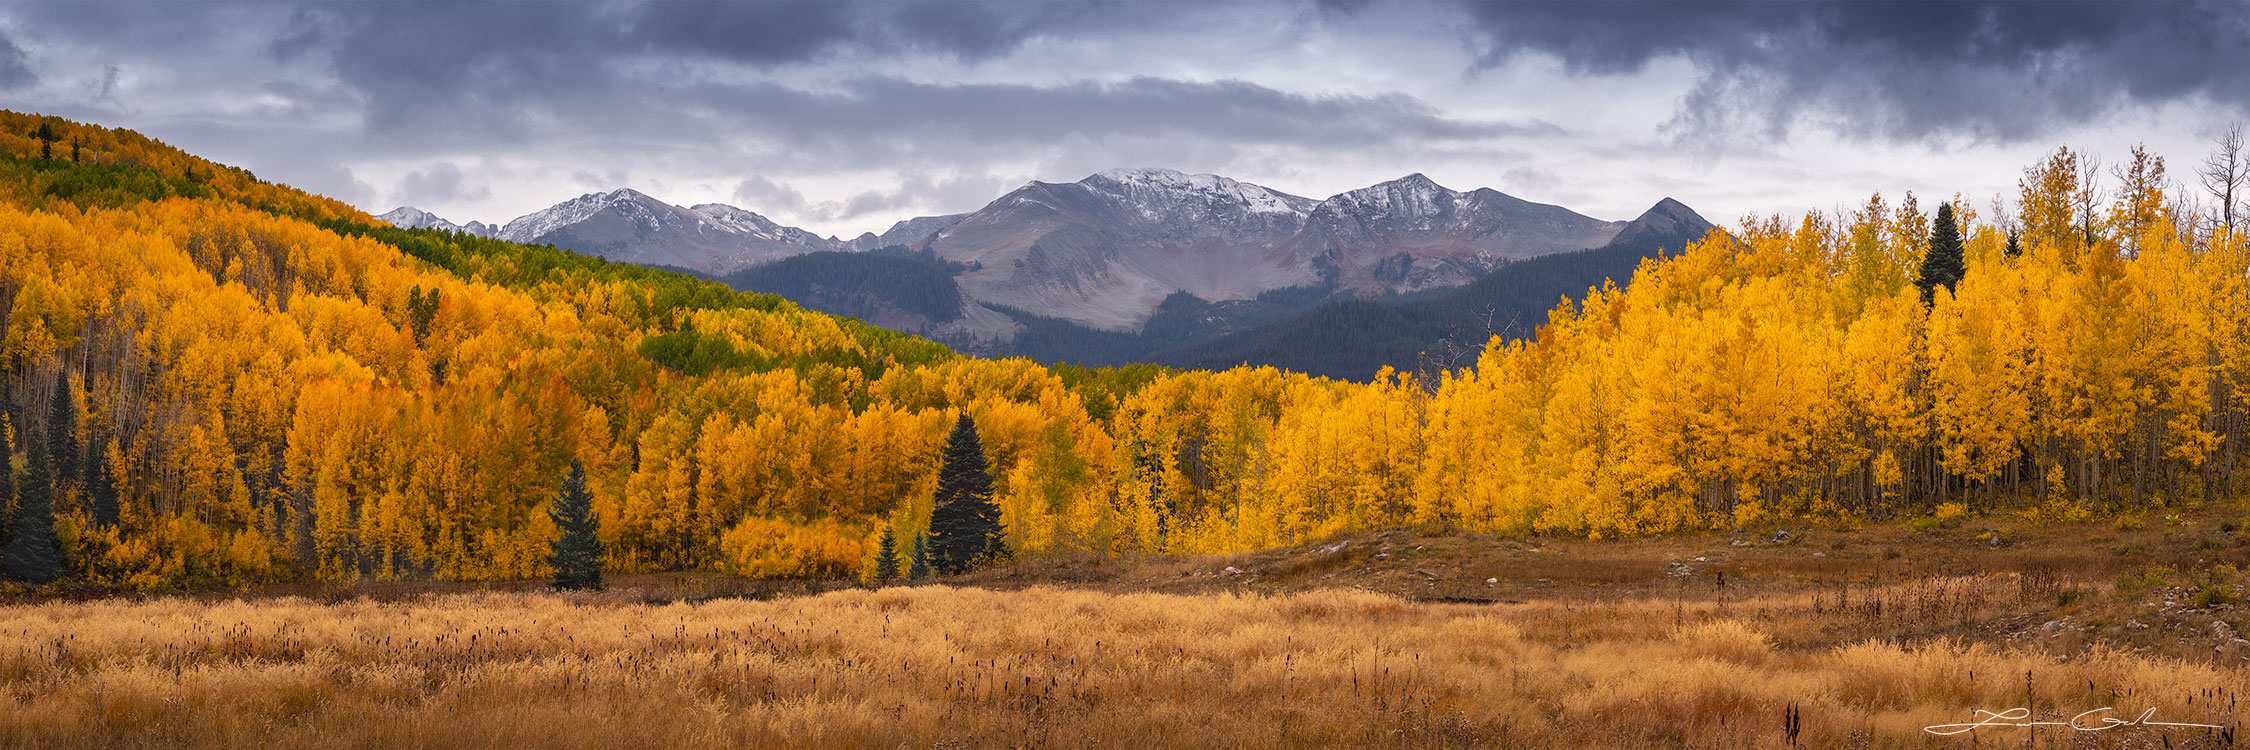 Fresh snow on mountain peaks and lots of autumn colors aspen trees - Gintchin Fine Art